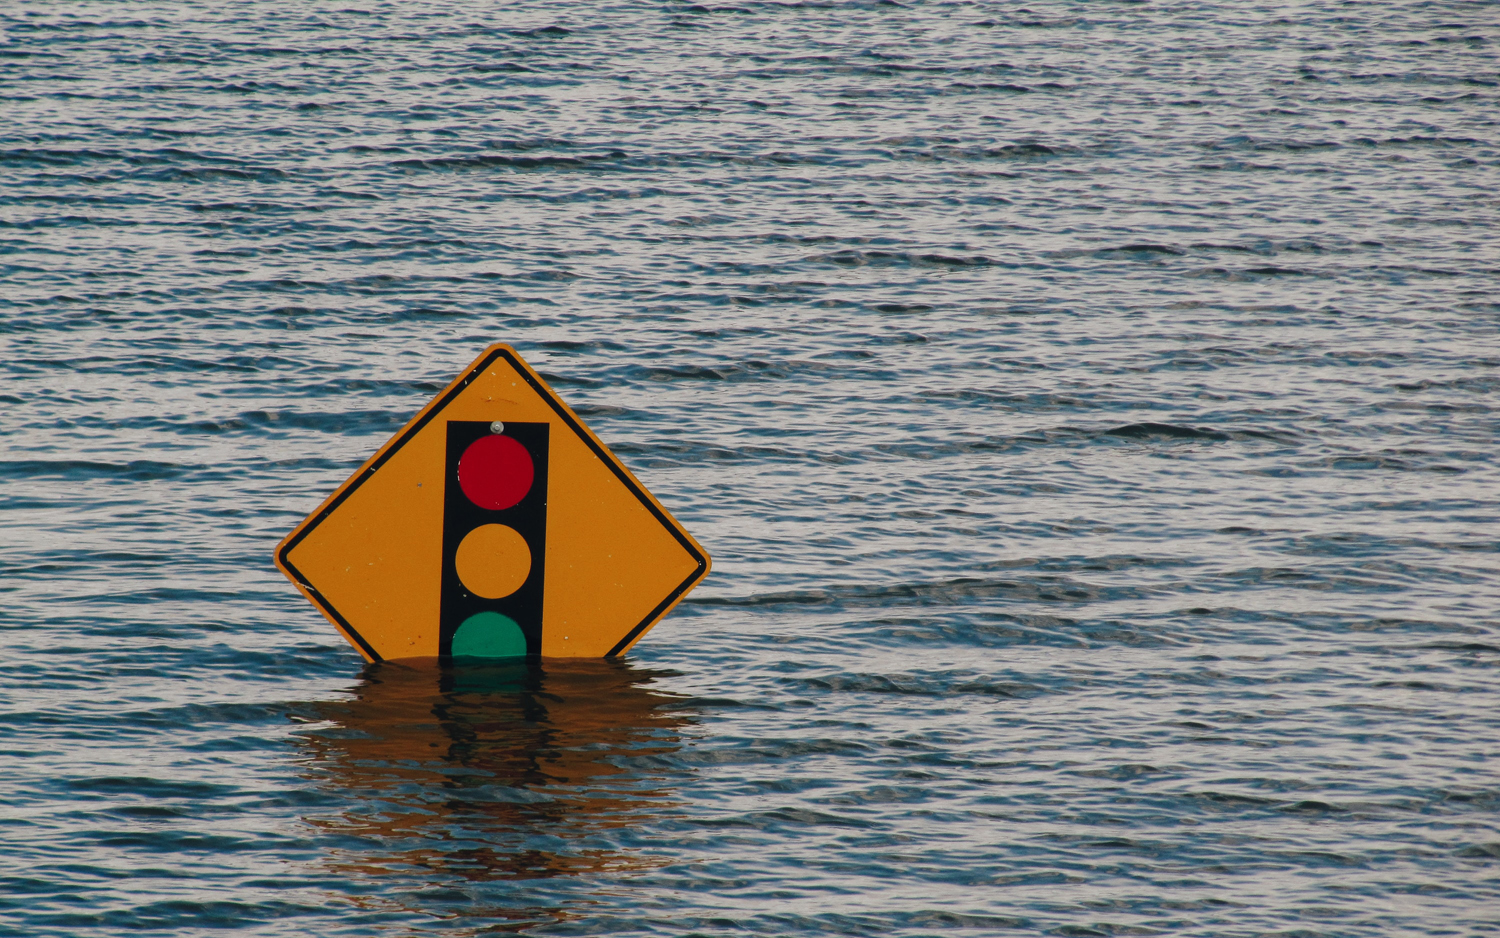 A street sign mostly submerged under water due to flooding as an image for Climate Change. Photo by Kelly Sikkema on Unsplash